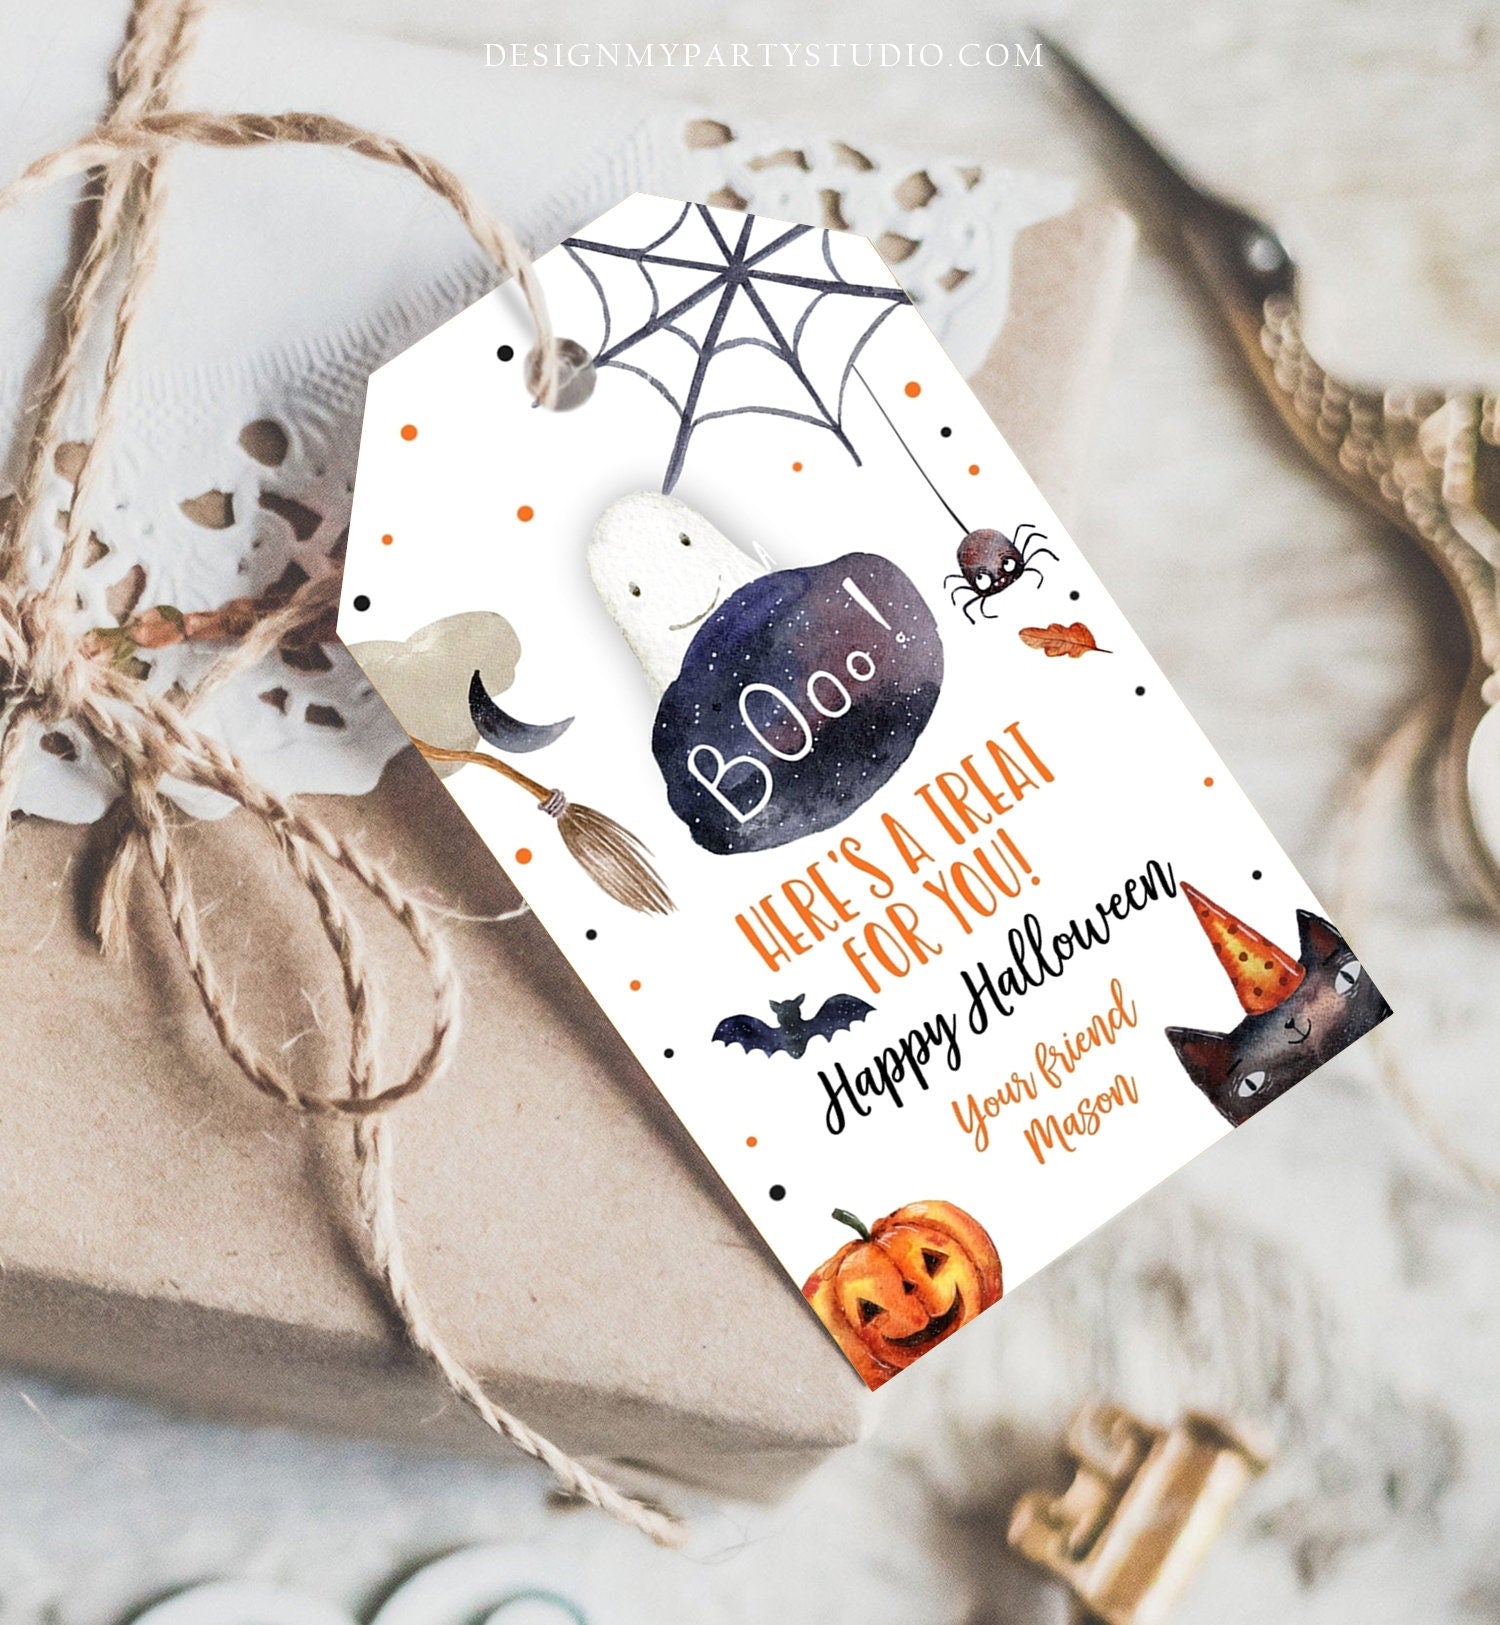 Editable Halloween Favor Tags Boo Gift Tags Costume Party Trick Or Treat Favor Tags Birthday Party Download Printable Template Corjl 0261